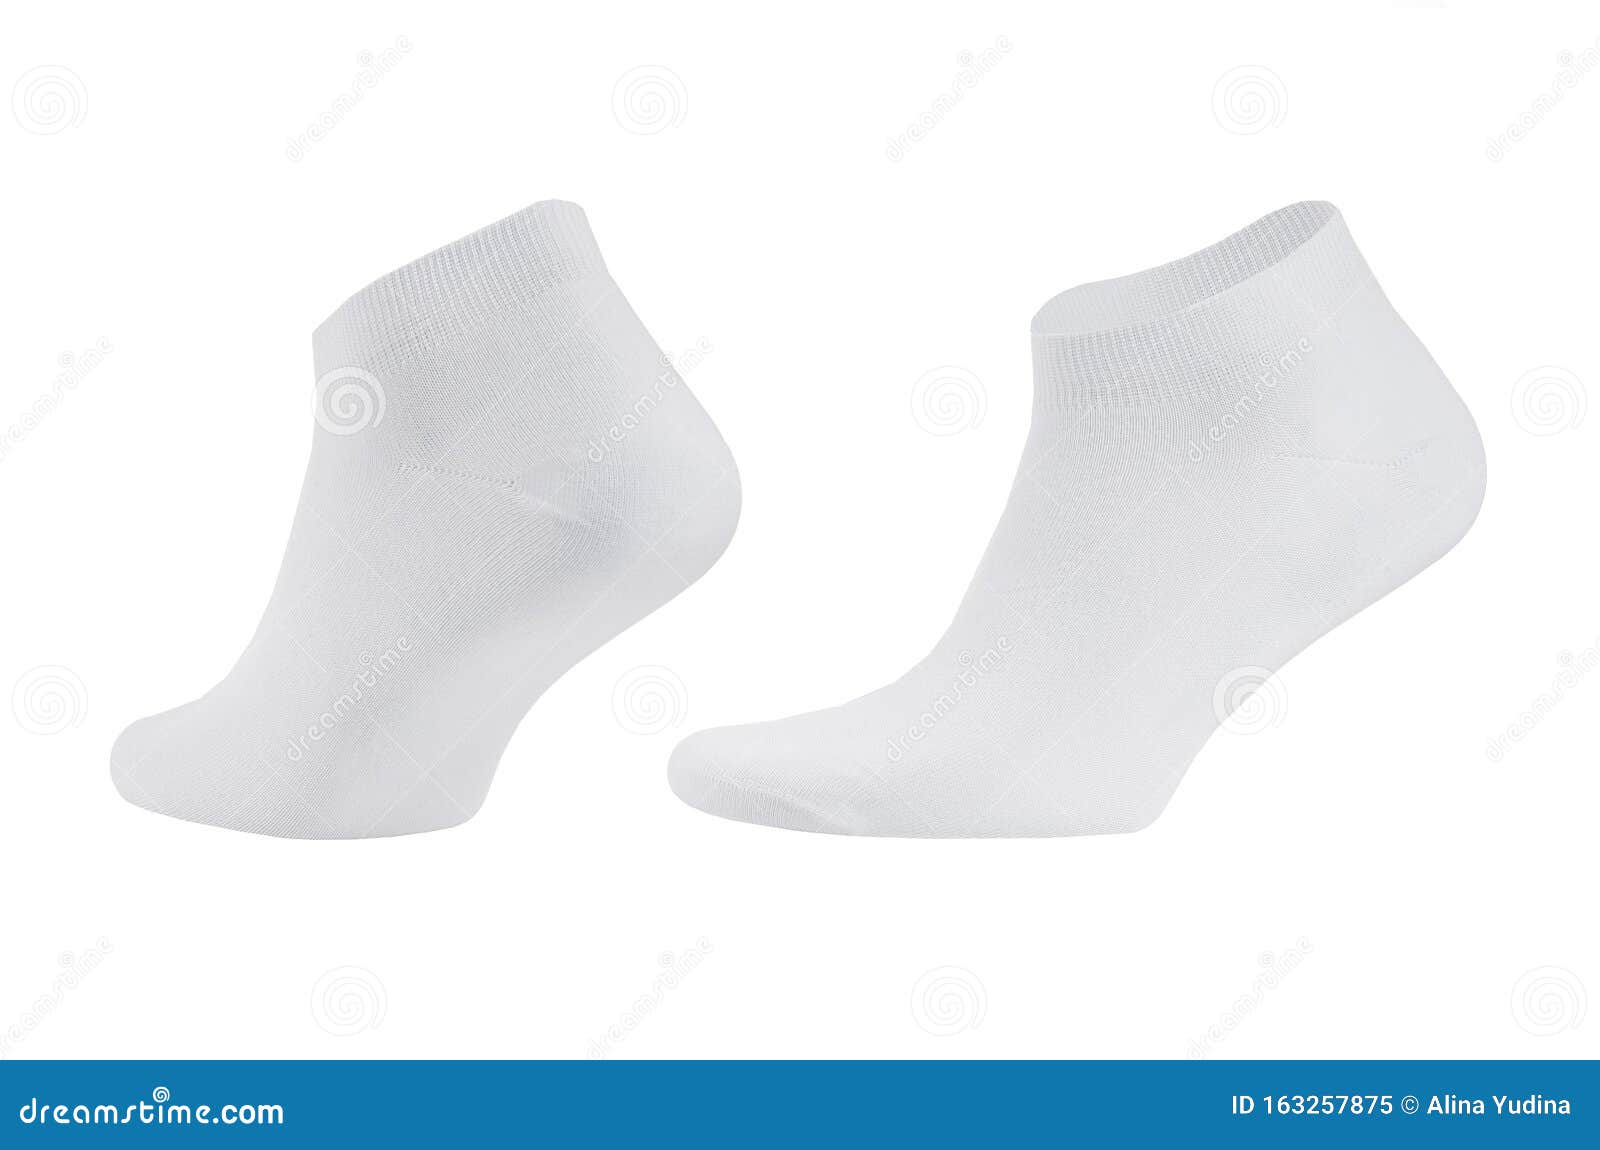 Blank White Cotton Sport Short Socks on Invisible Foot Isolated on ...